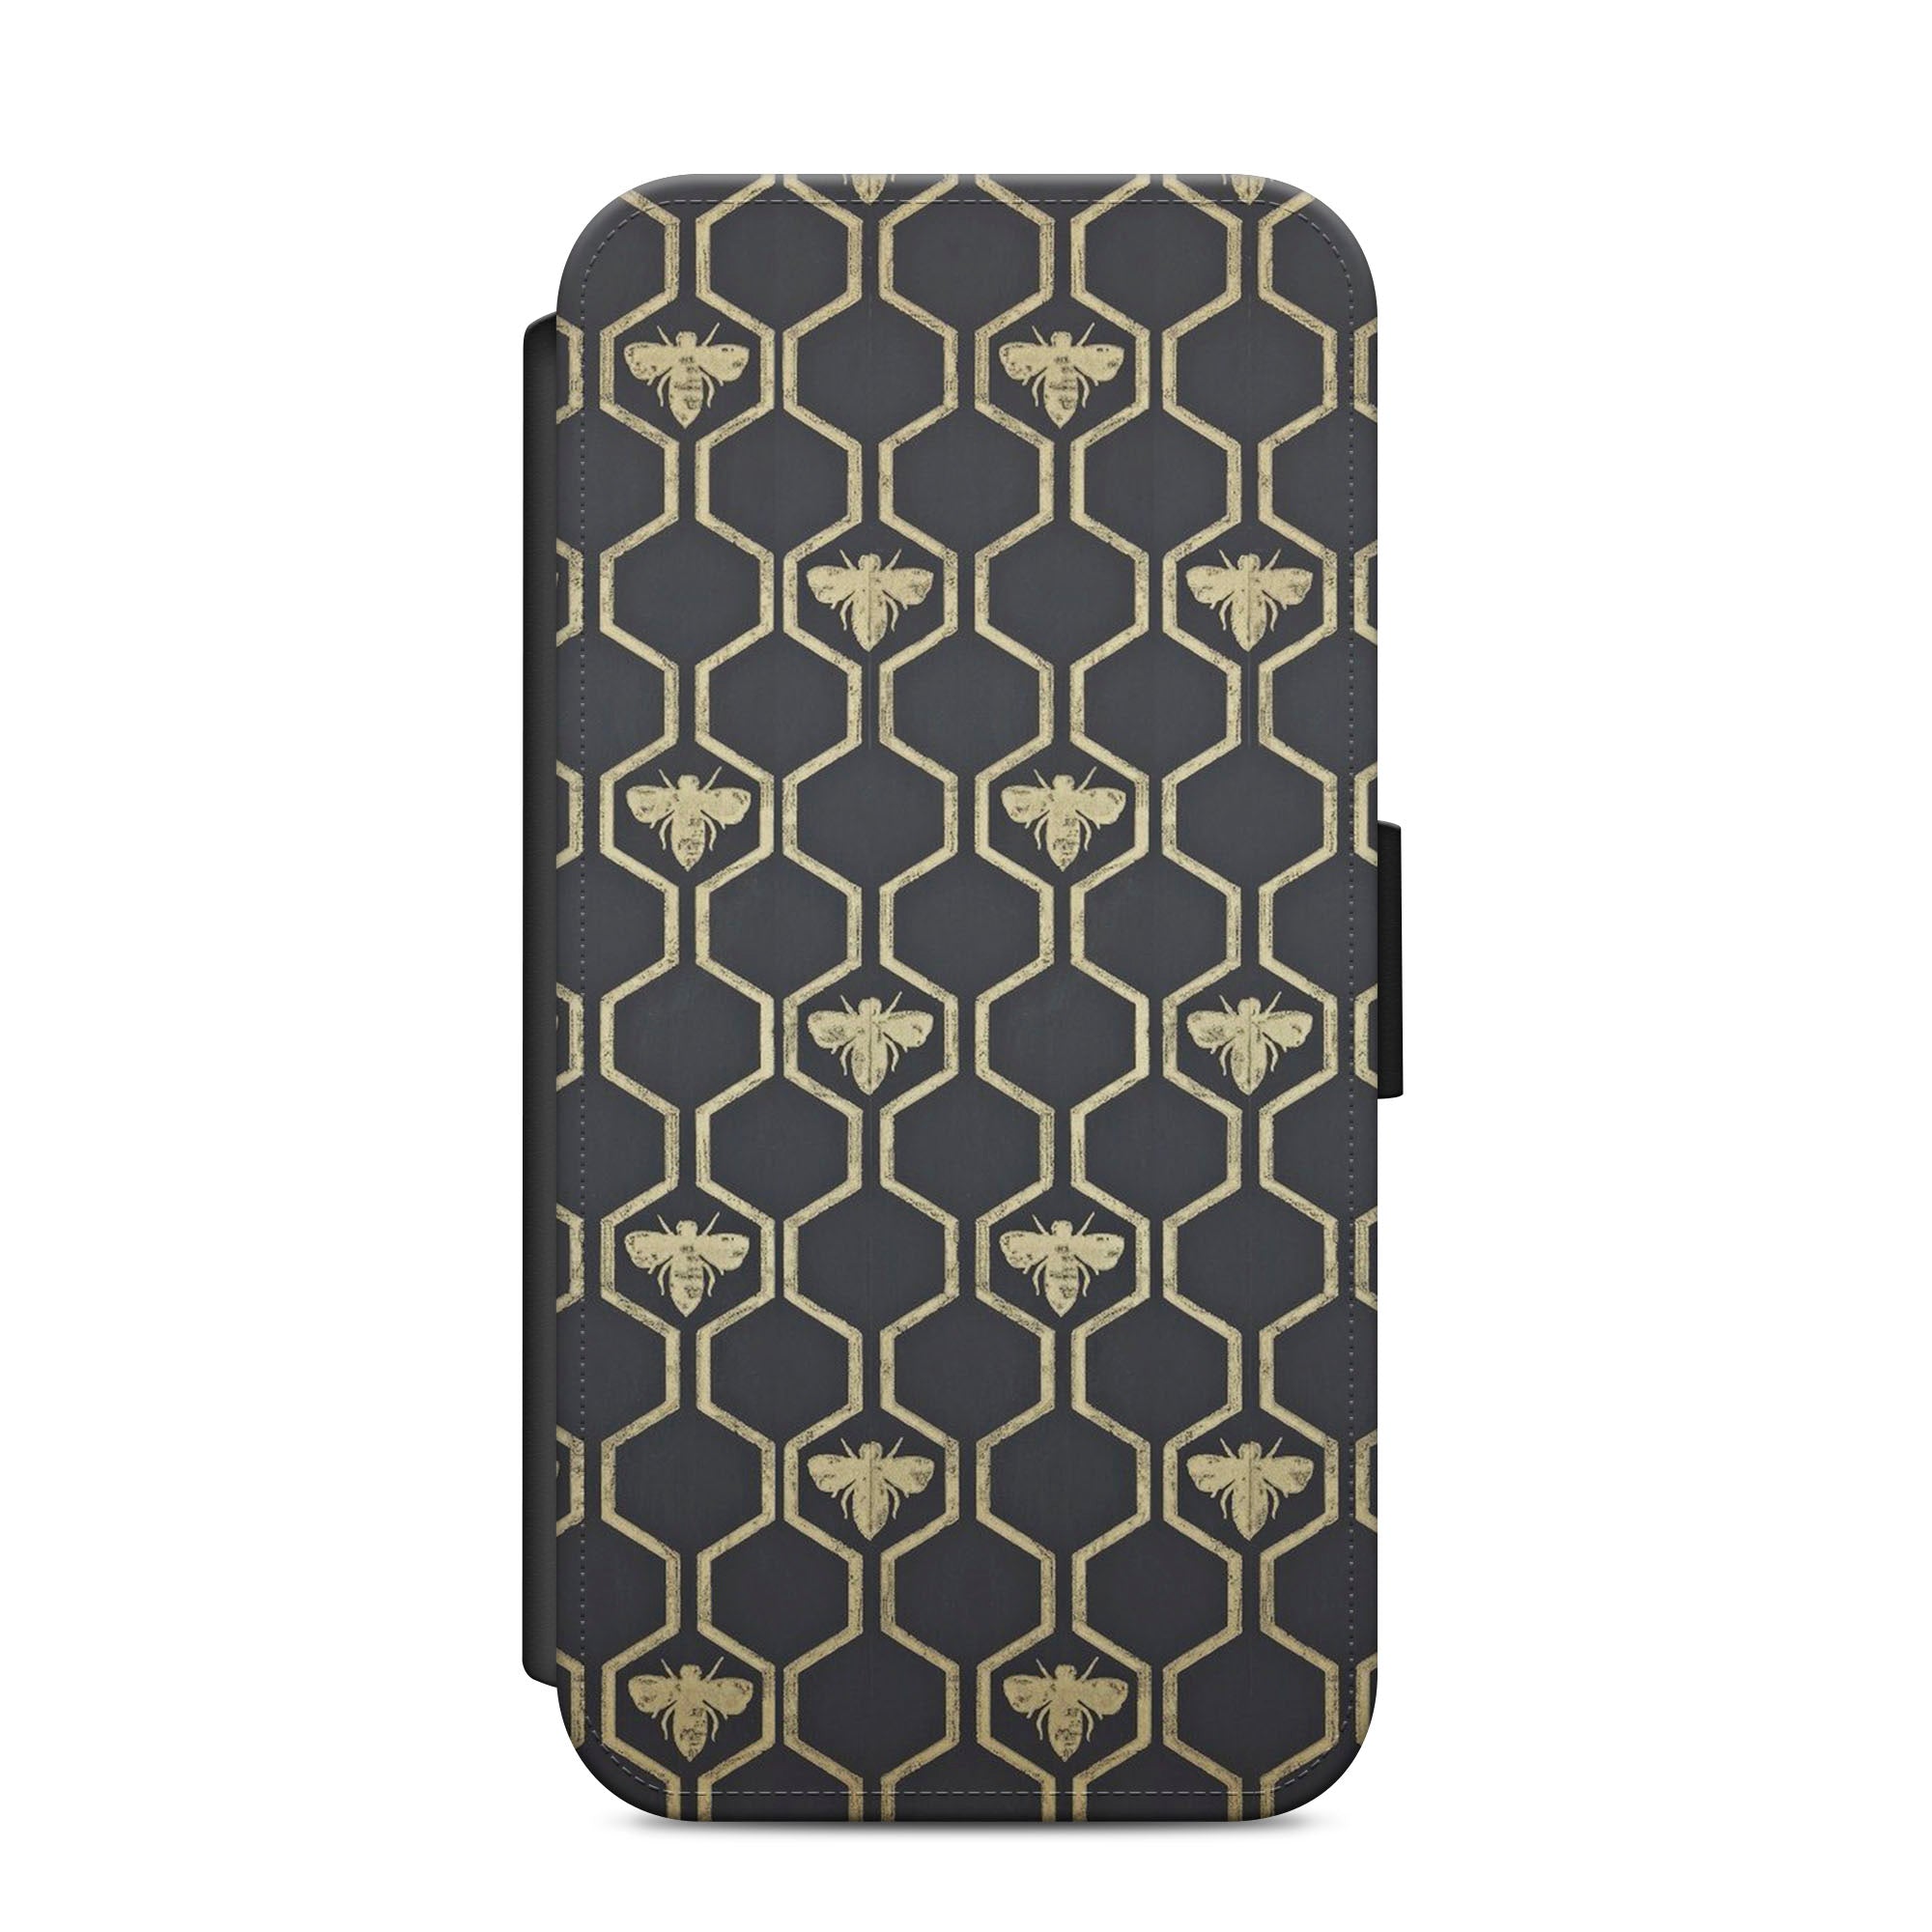 Bumble Bee Honeycomb Faux Leather Flip Case Wallet for iPhone / Samsung